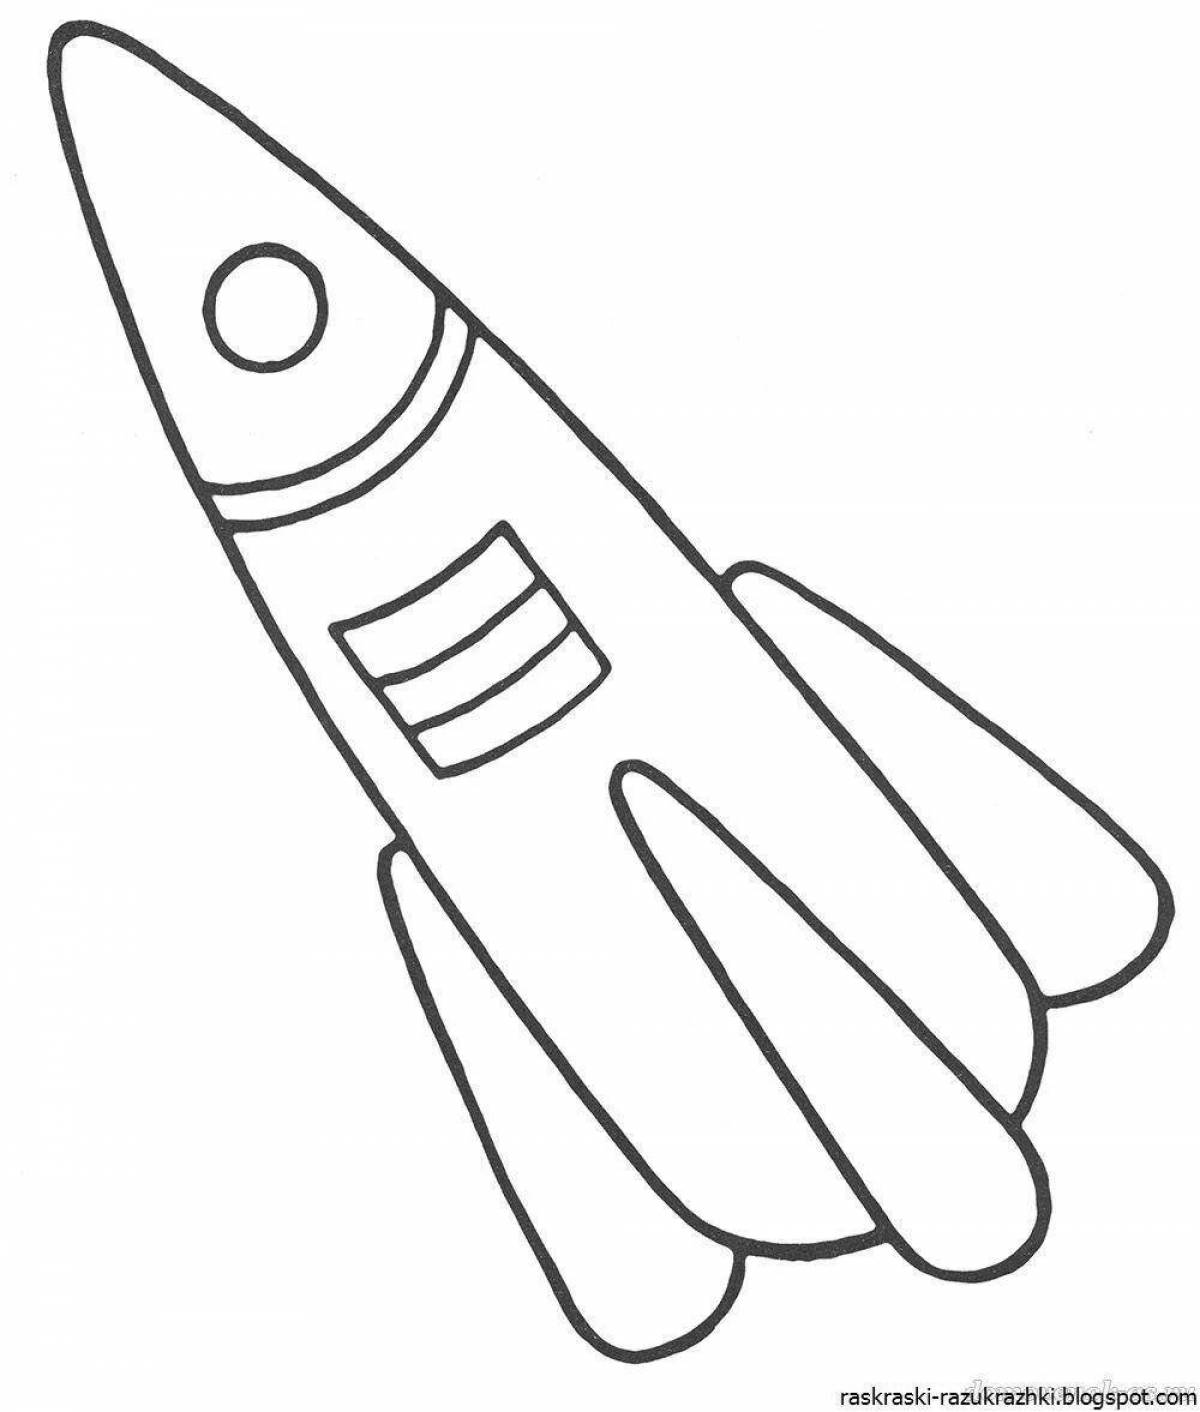 Adorable rocket drawing for kids